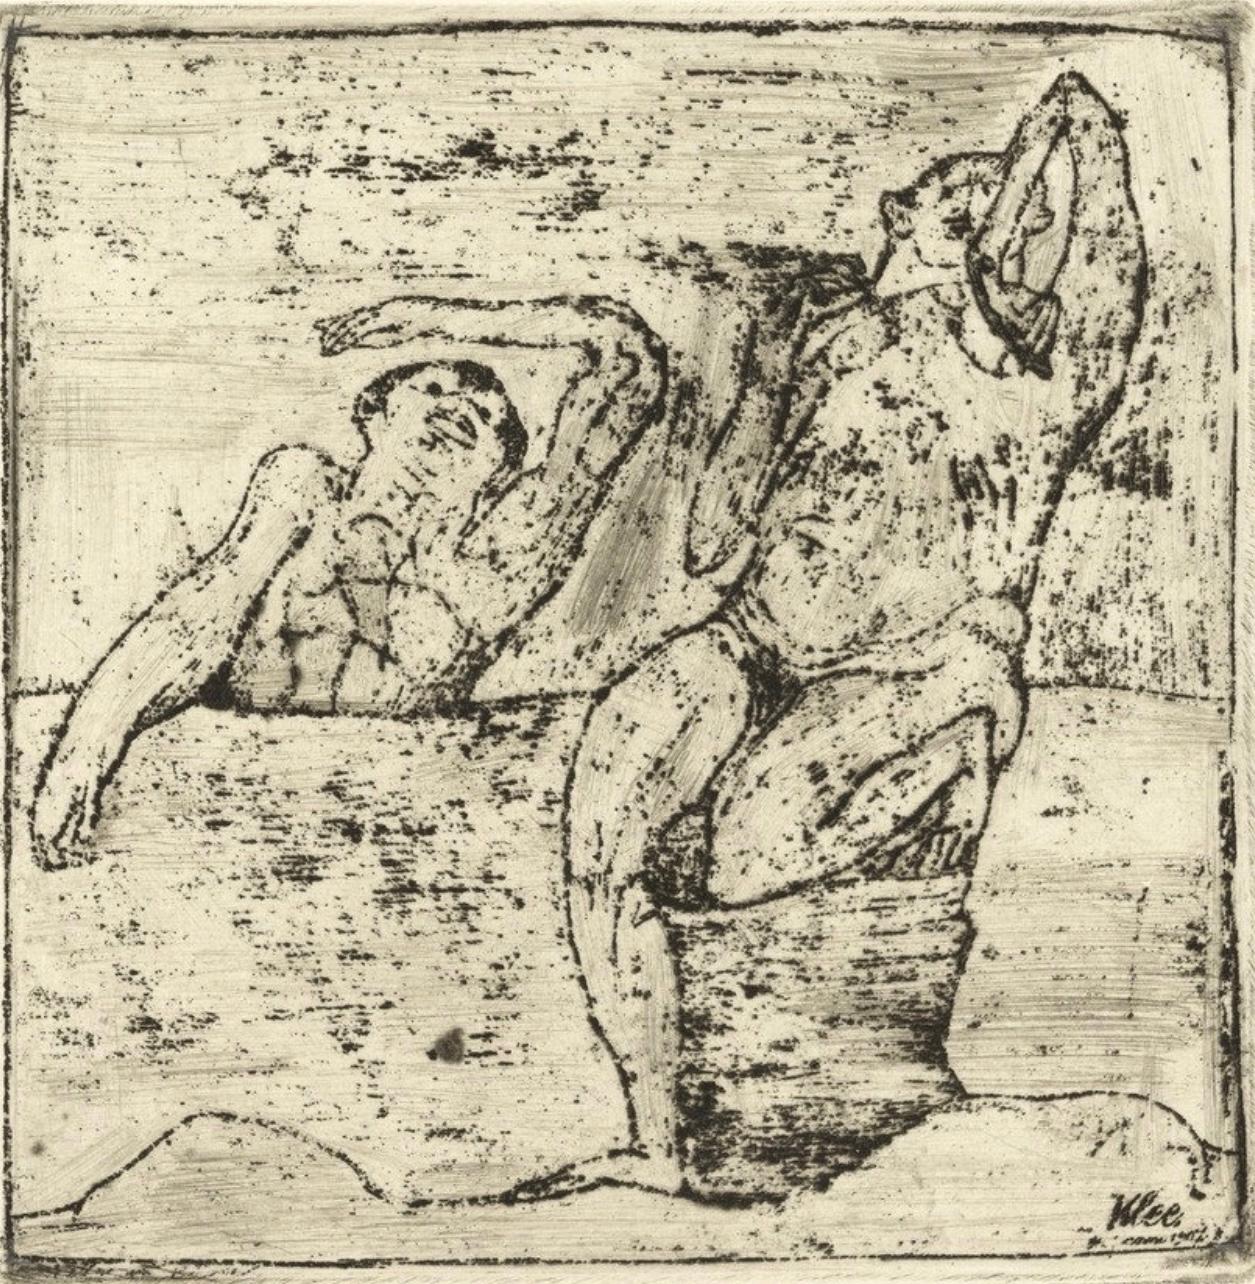 Klee, Two Nudes in the Lake, Prints of Paul Klee (after)